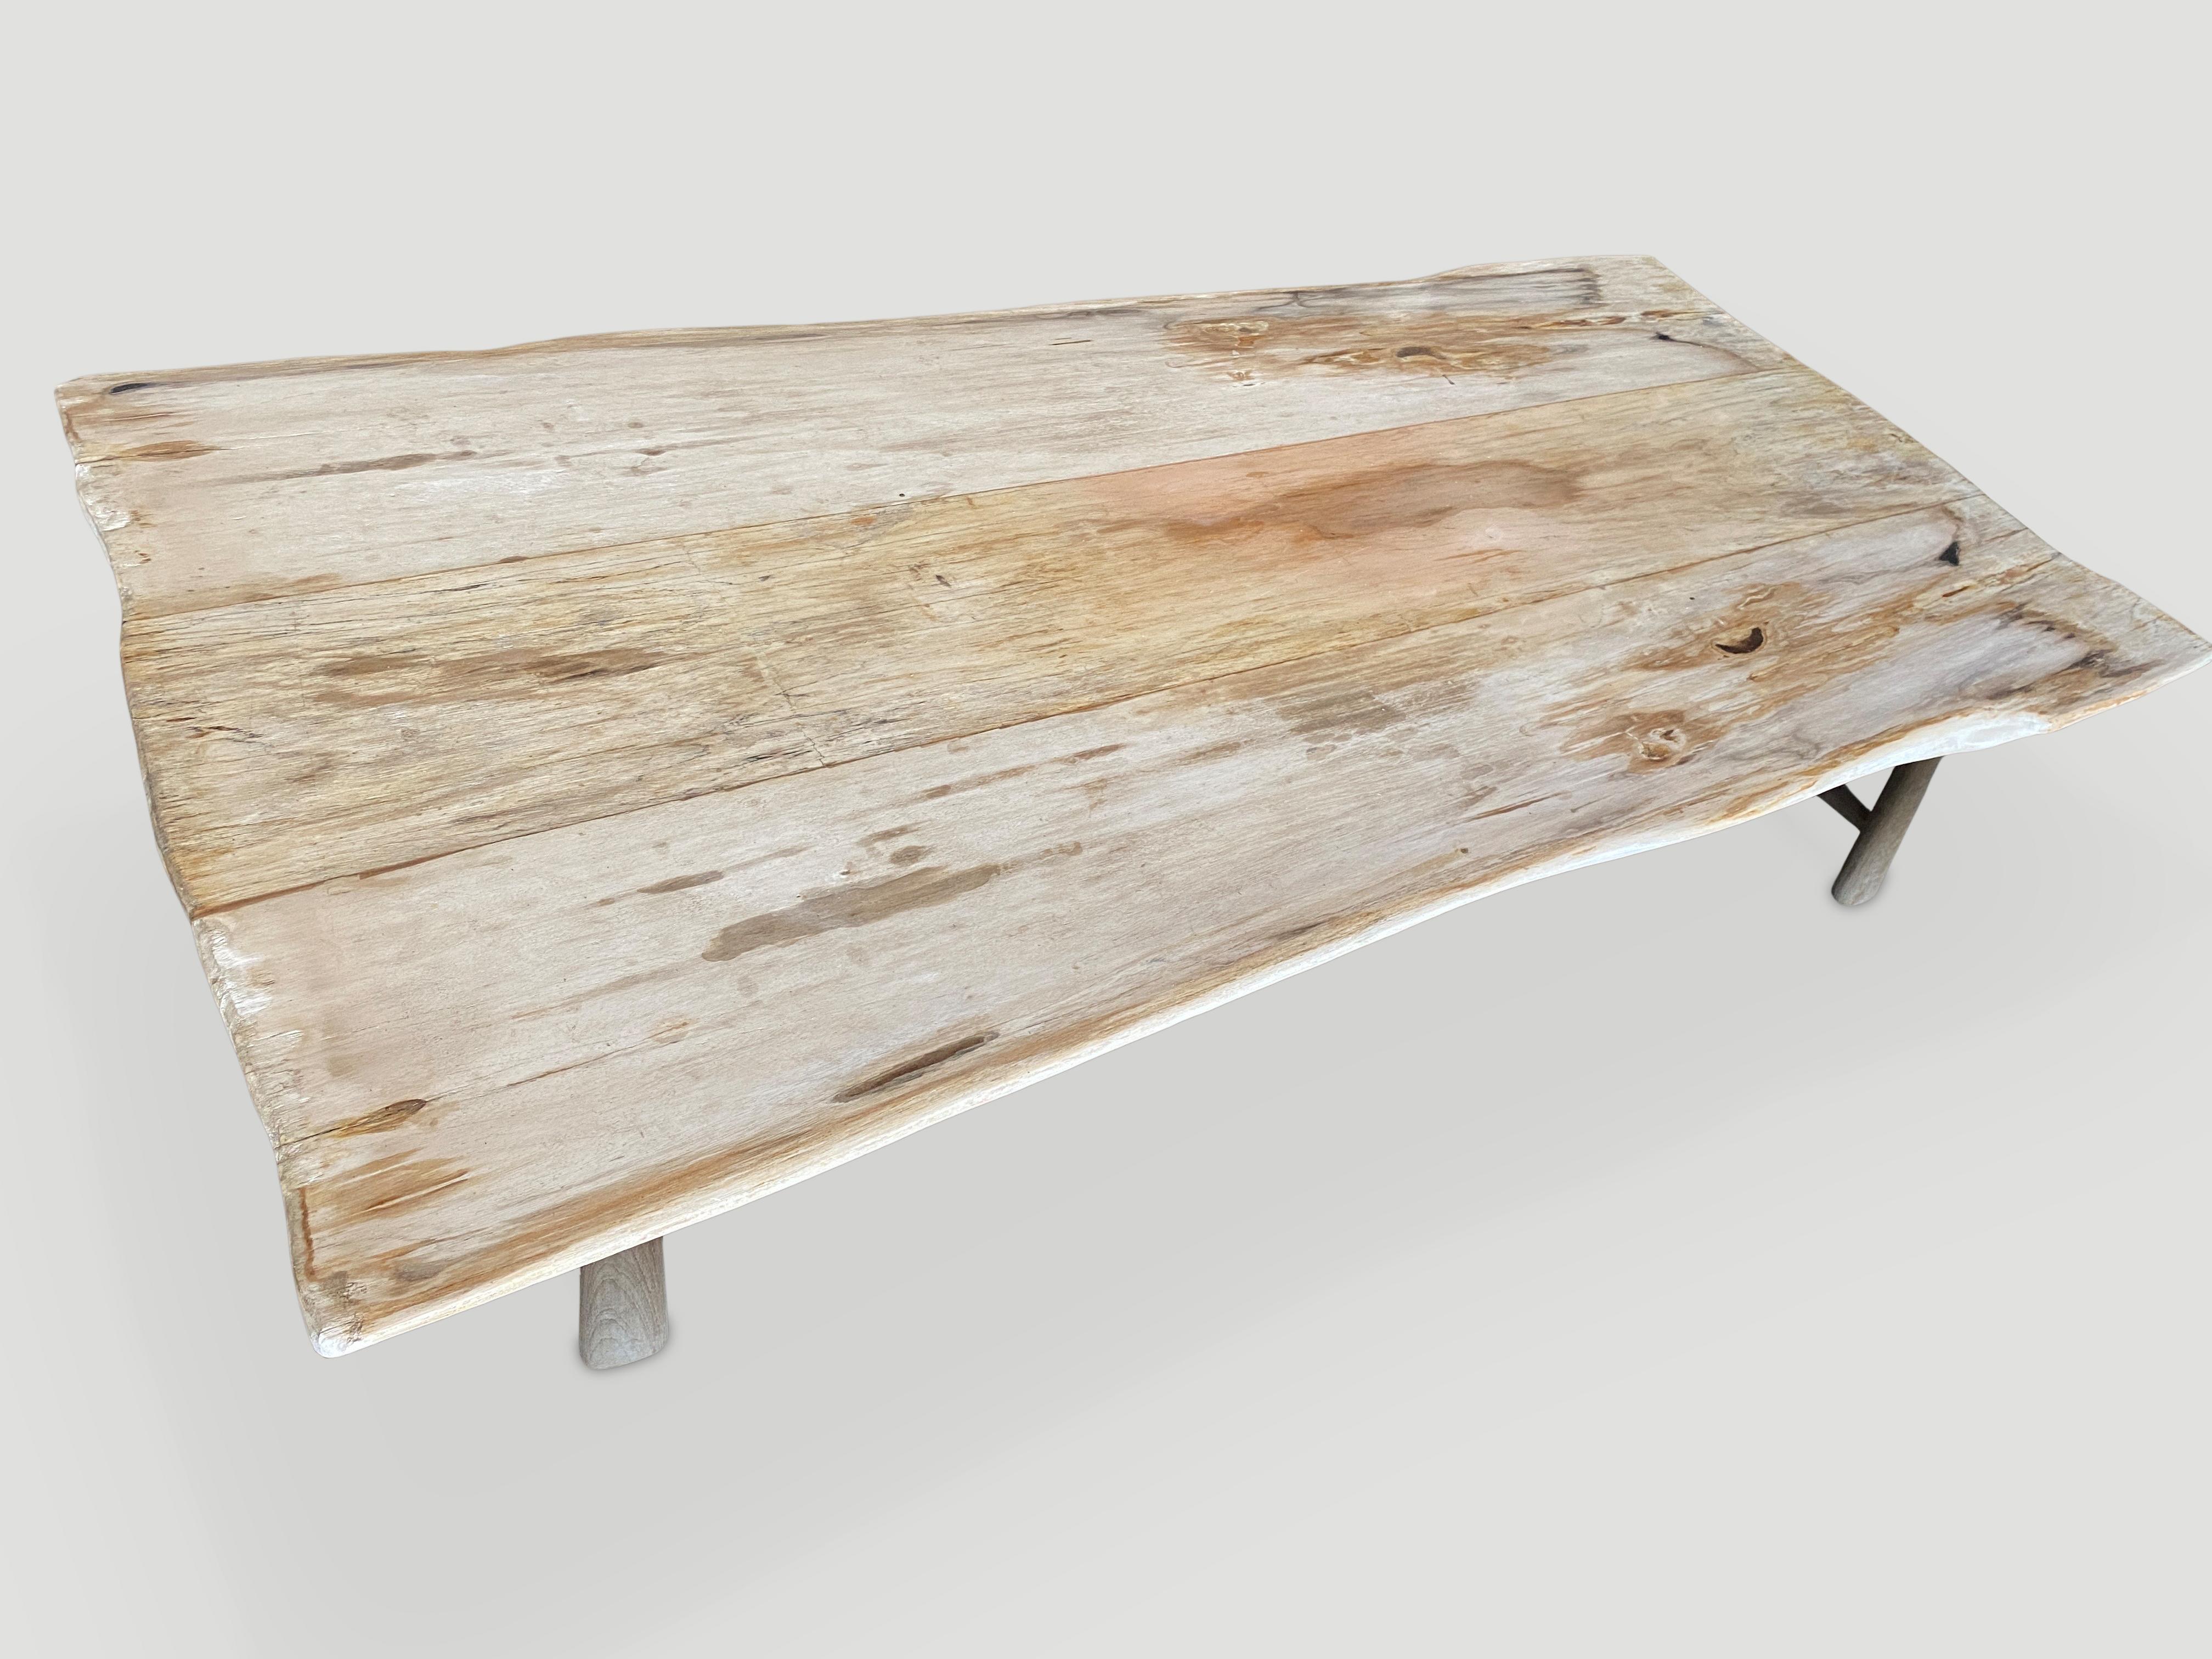 Impressive two inch thick high quality petrified wood live edge dining table or coffee table. Three slabs from the same petrified wood log are joined together. The live edge varies from 38